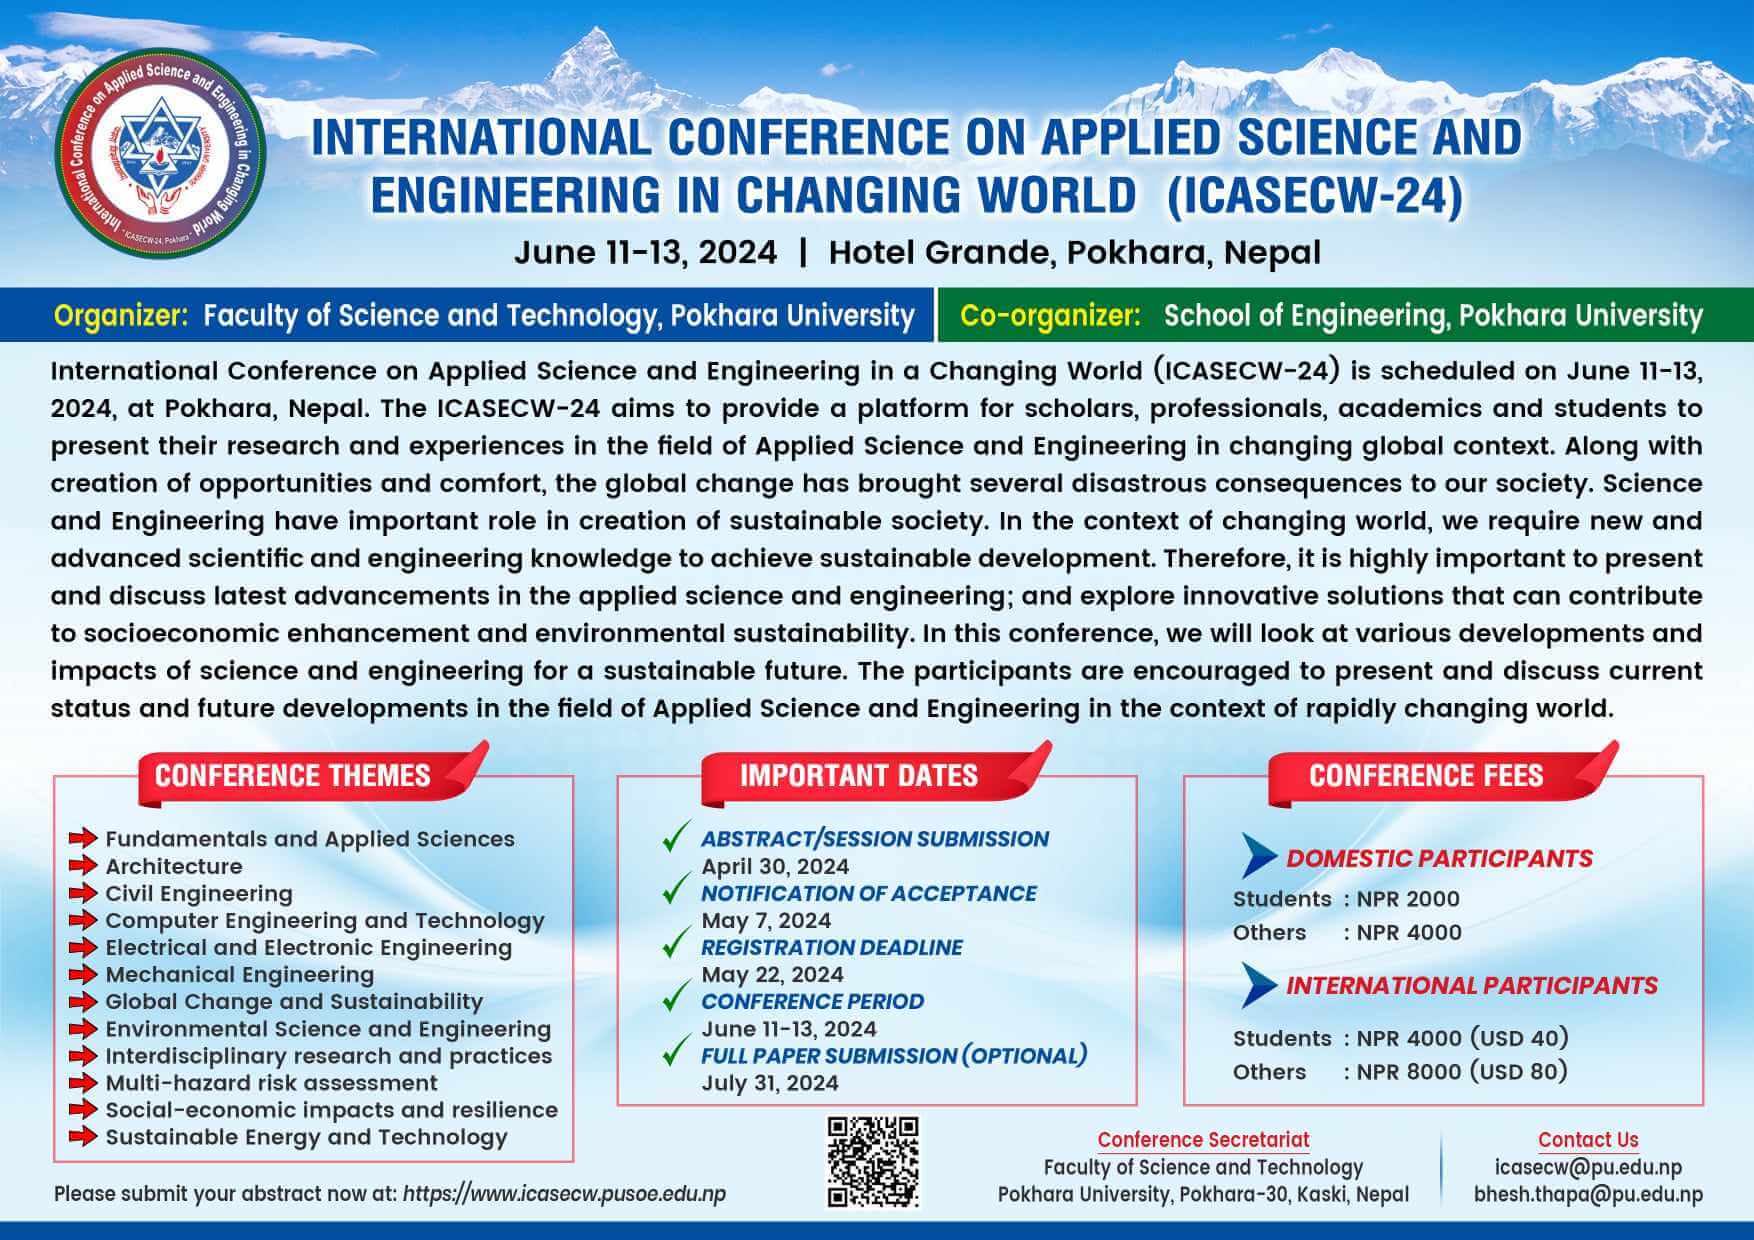 International Conference on Applied Science and Engineering in Changing World